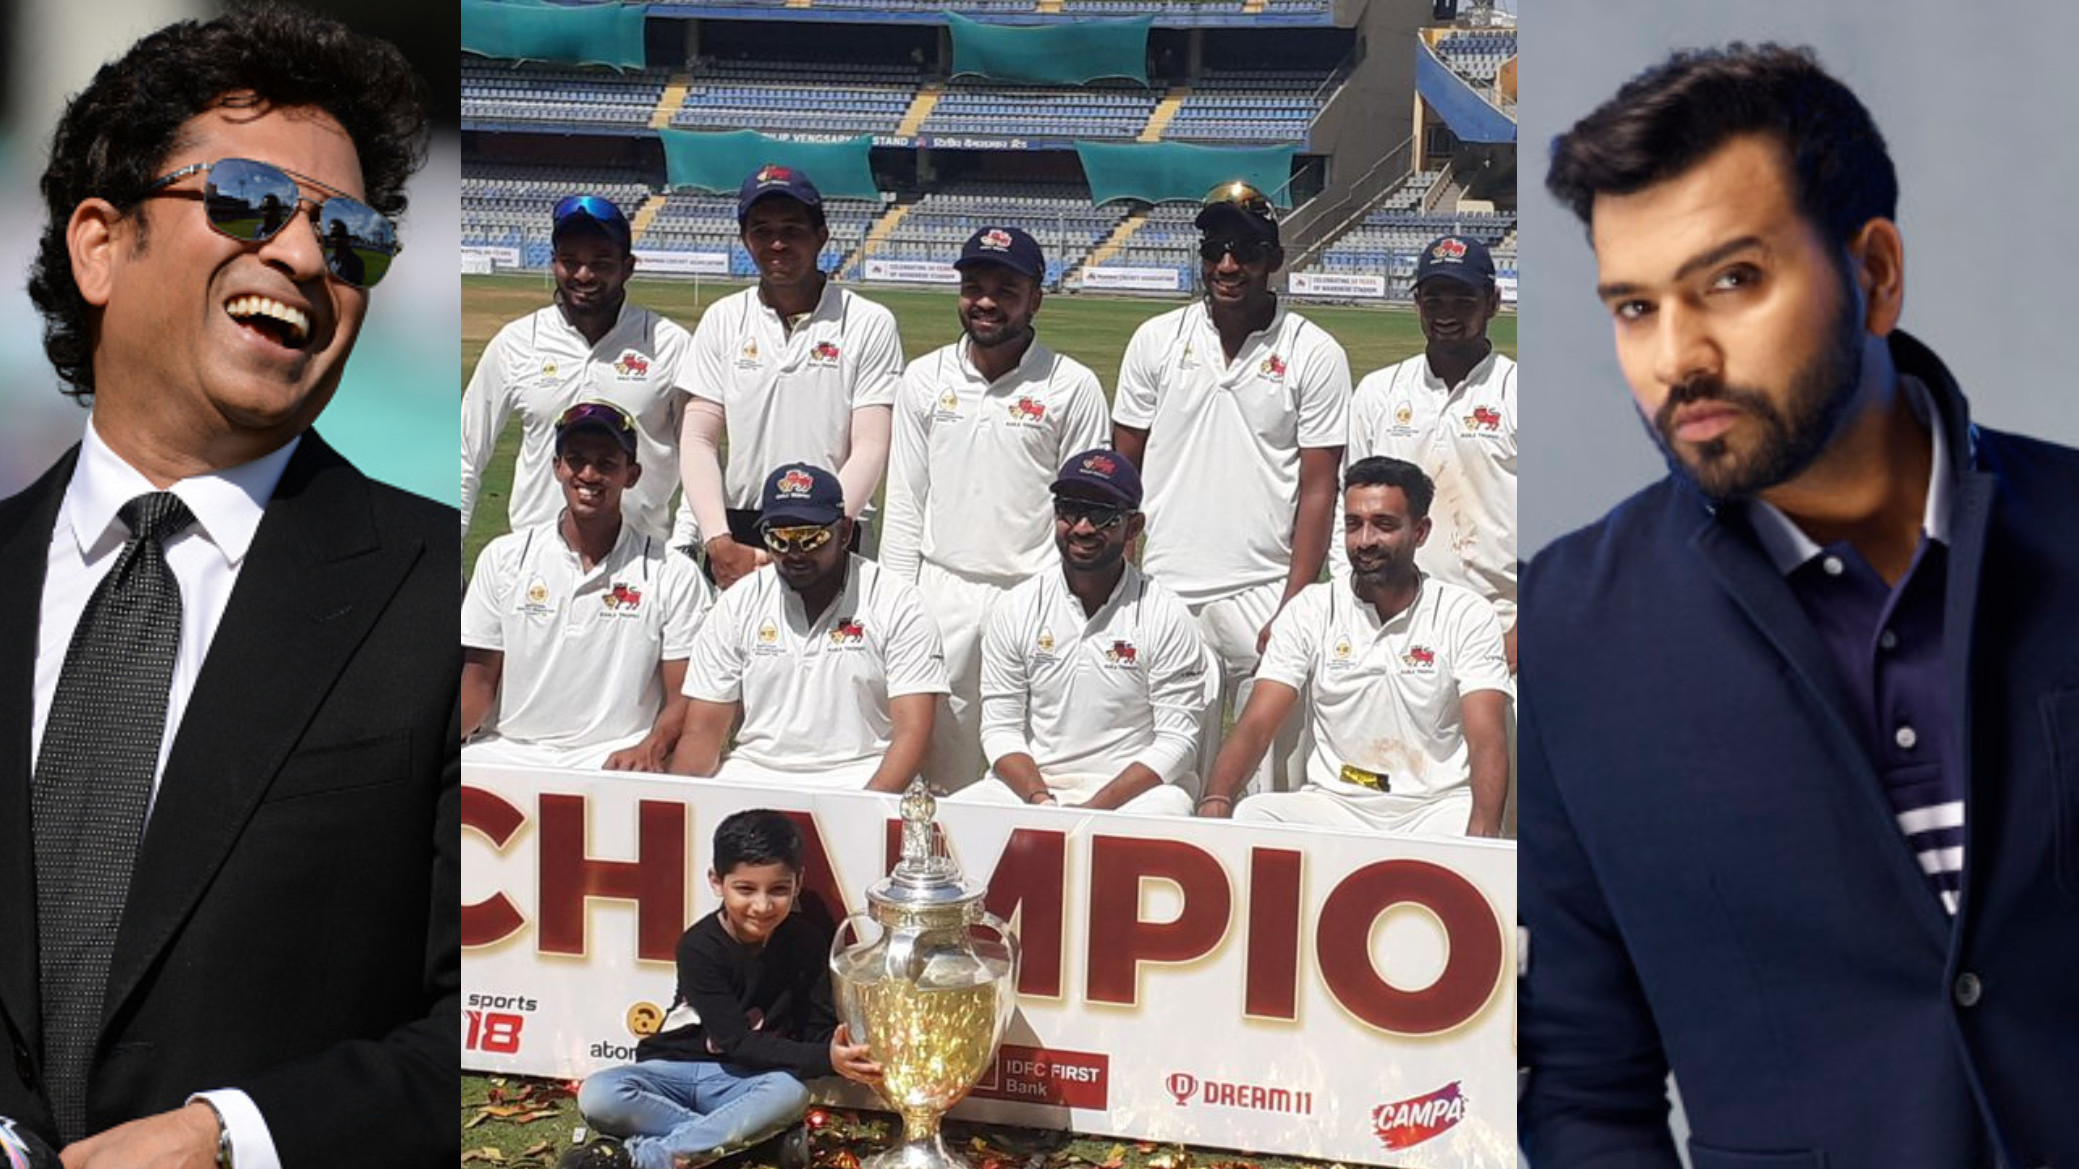 Indian Cricket fraternity lauds Mumbai as they defeat Vidarbha to win their 42nd Ranji Trophy title